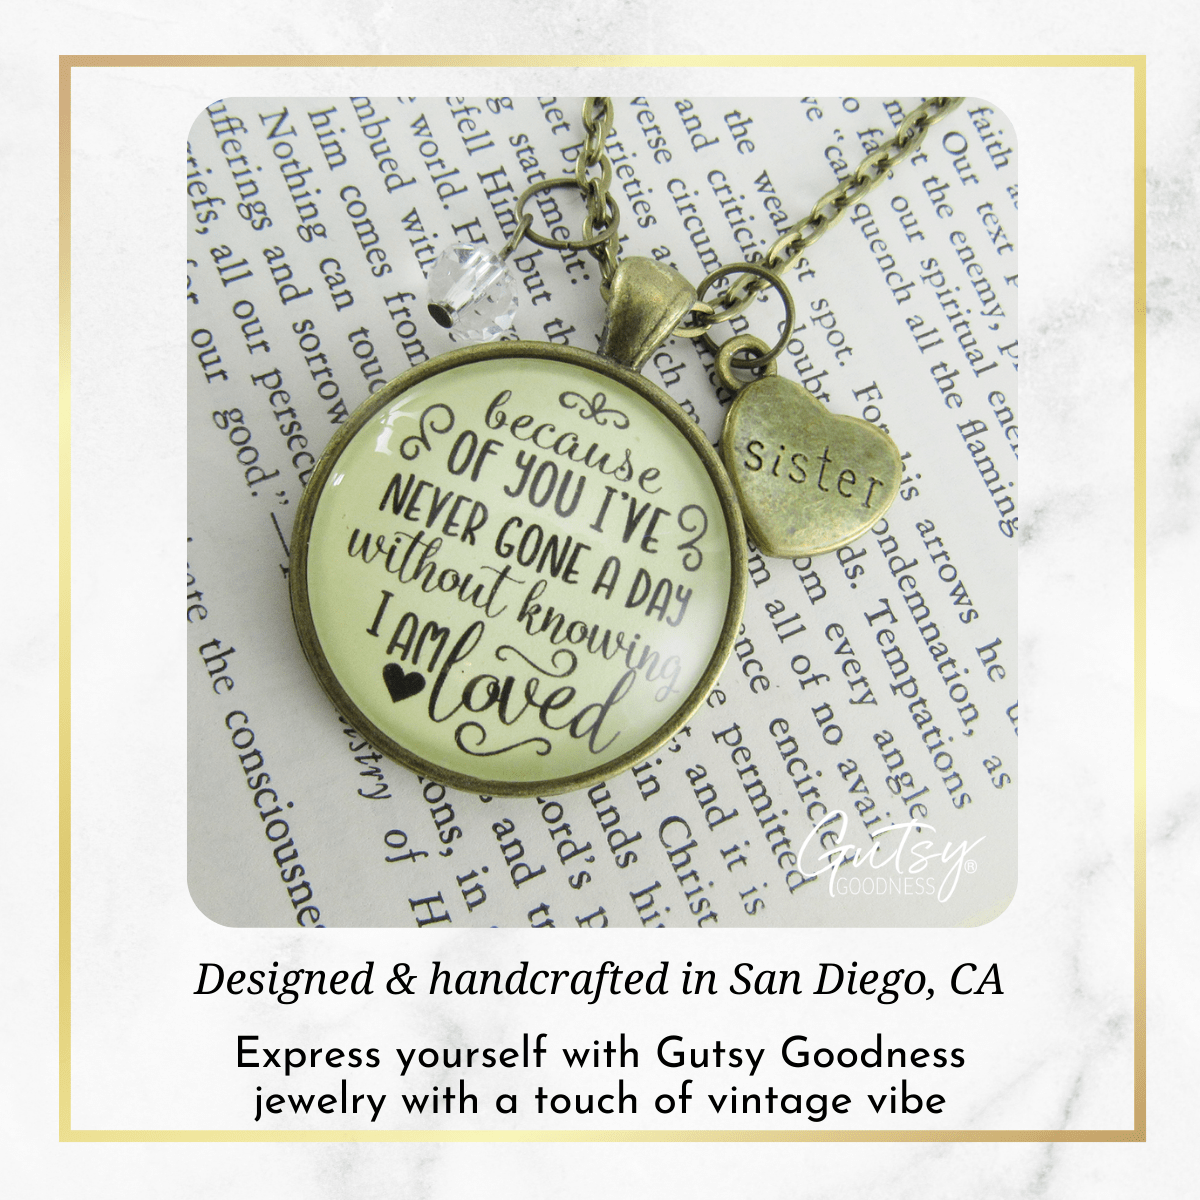 Gutsy Goodness Sister Necklace Because of Your Love Gift Family Womens Jewelry - Gutsy Goodness Handmade Jewelry;Sister Necklace Because Of Your Love Gift Family Womens Jewelry - Gutsy Goodness Handmade Jewelry Gifts